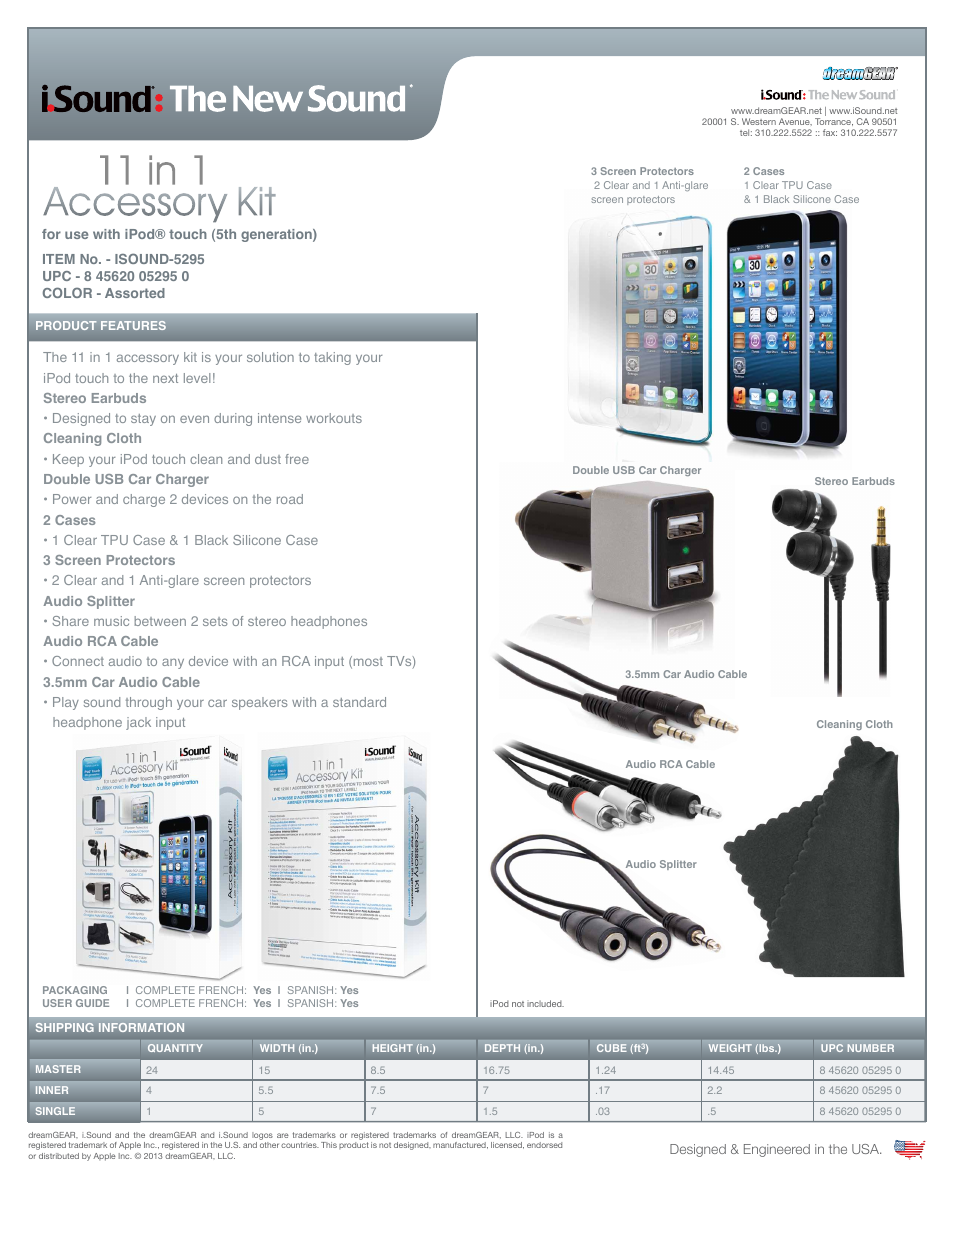 11 in 1 Accessory Kit for iPodtouch (5th gen) - Sell Sheet